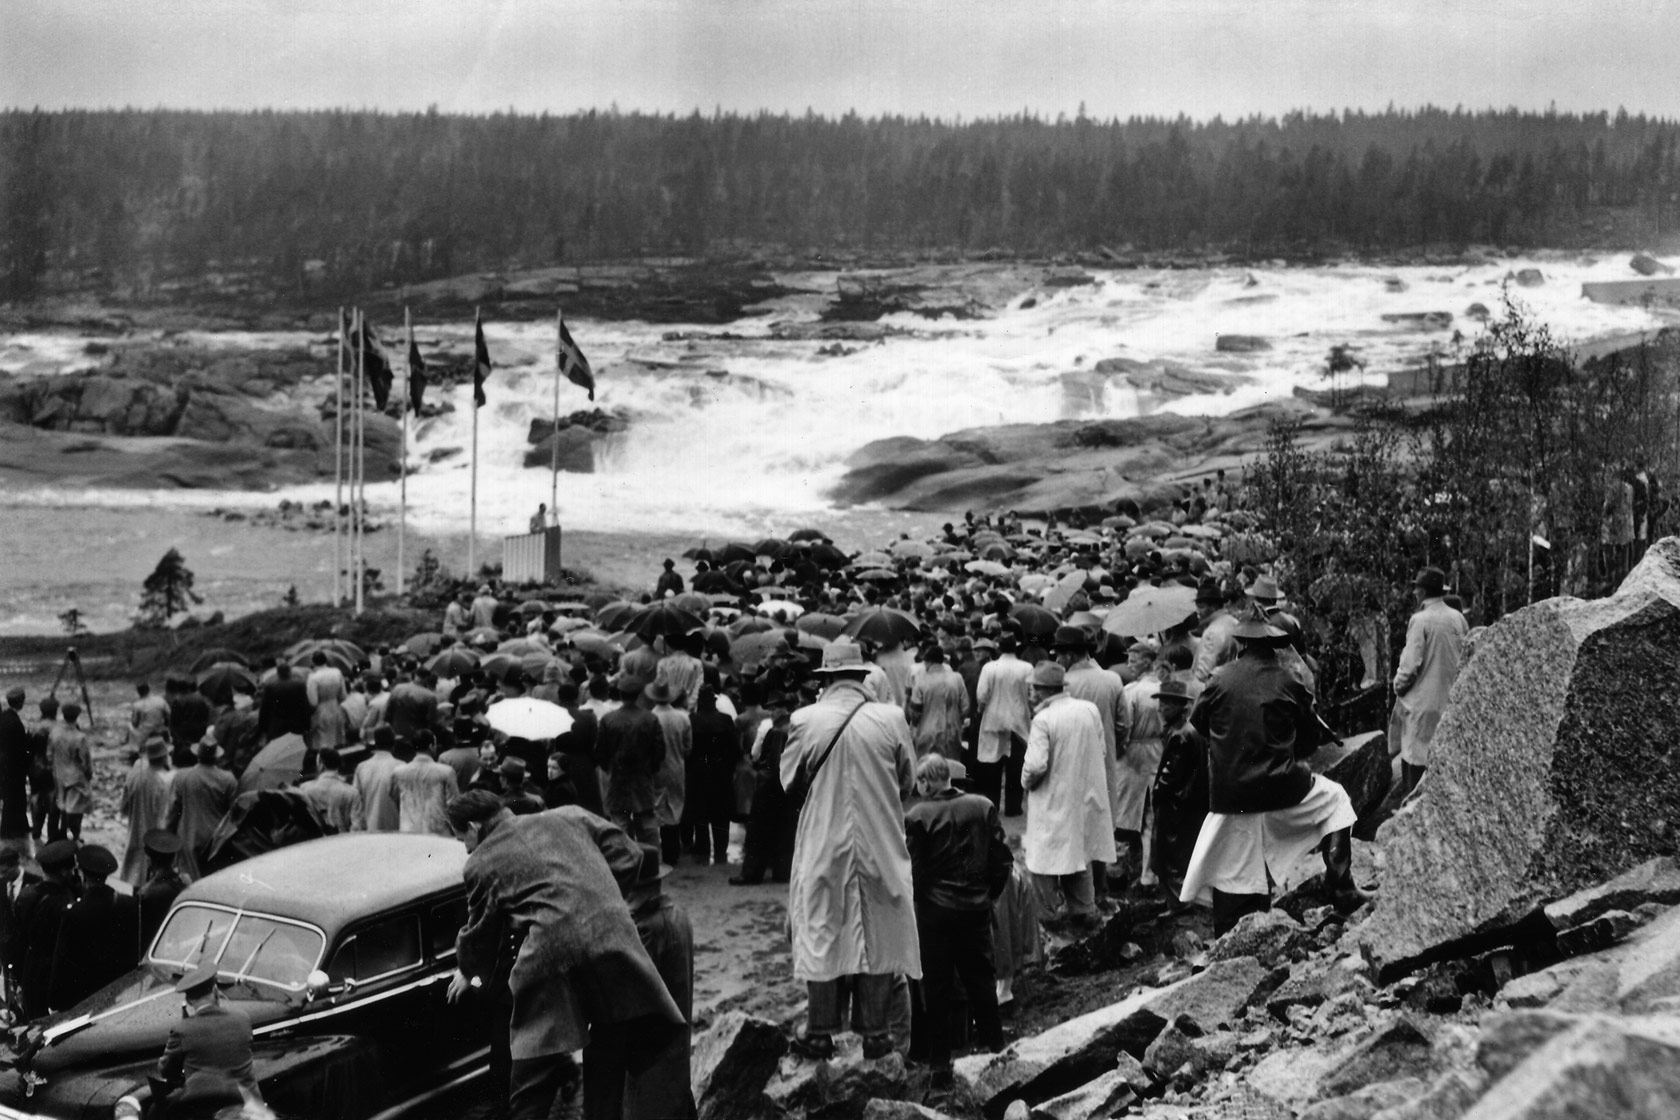 People gathered for the opening of Harsprånget hydro power station in Sweden, 1952